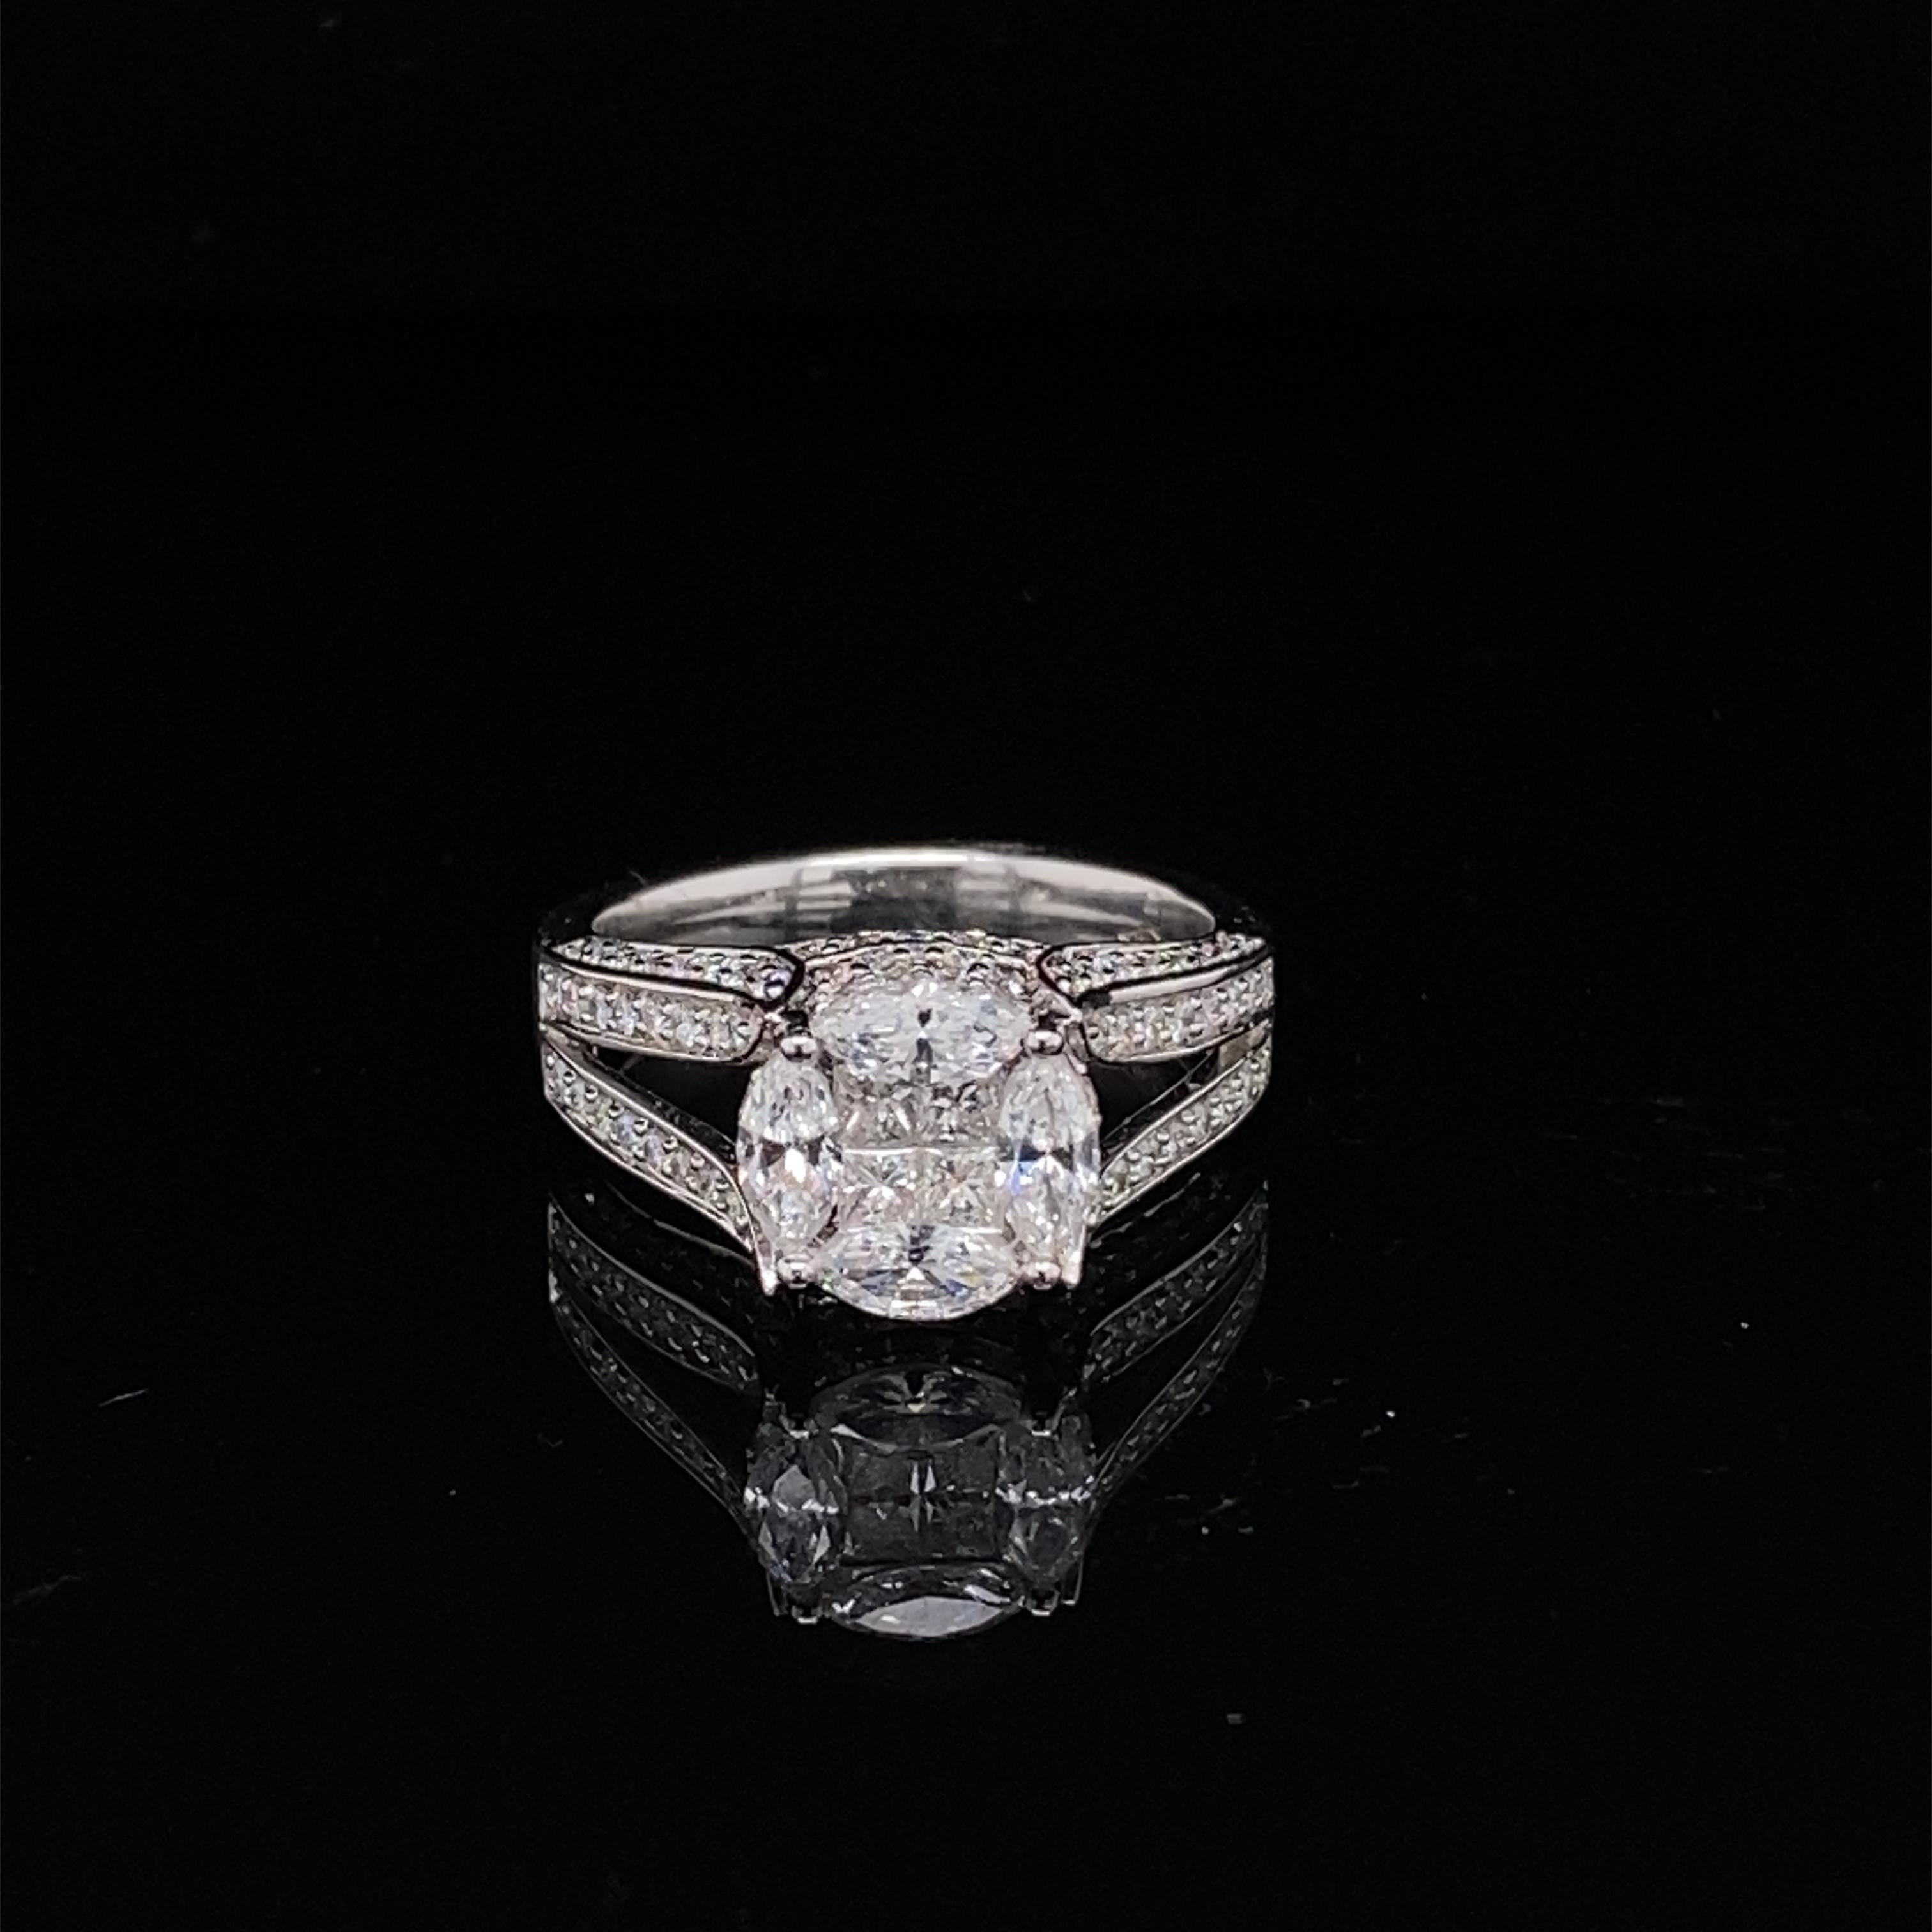 This stunning ring features a beautiful Round Cluster of White Diamonds comprising of 4 marquise diamonds and 4 princess cut diamonds. The Round Cluster sits on a Double Diamond Shank. This ring is set in 18K White Gold.
Total Diamond Weight = 1.49